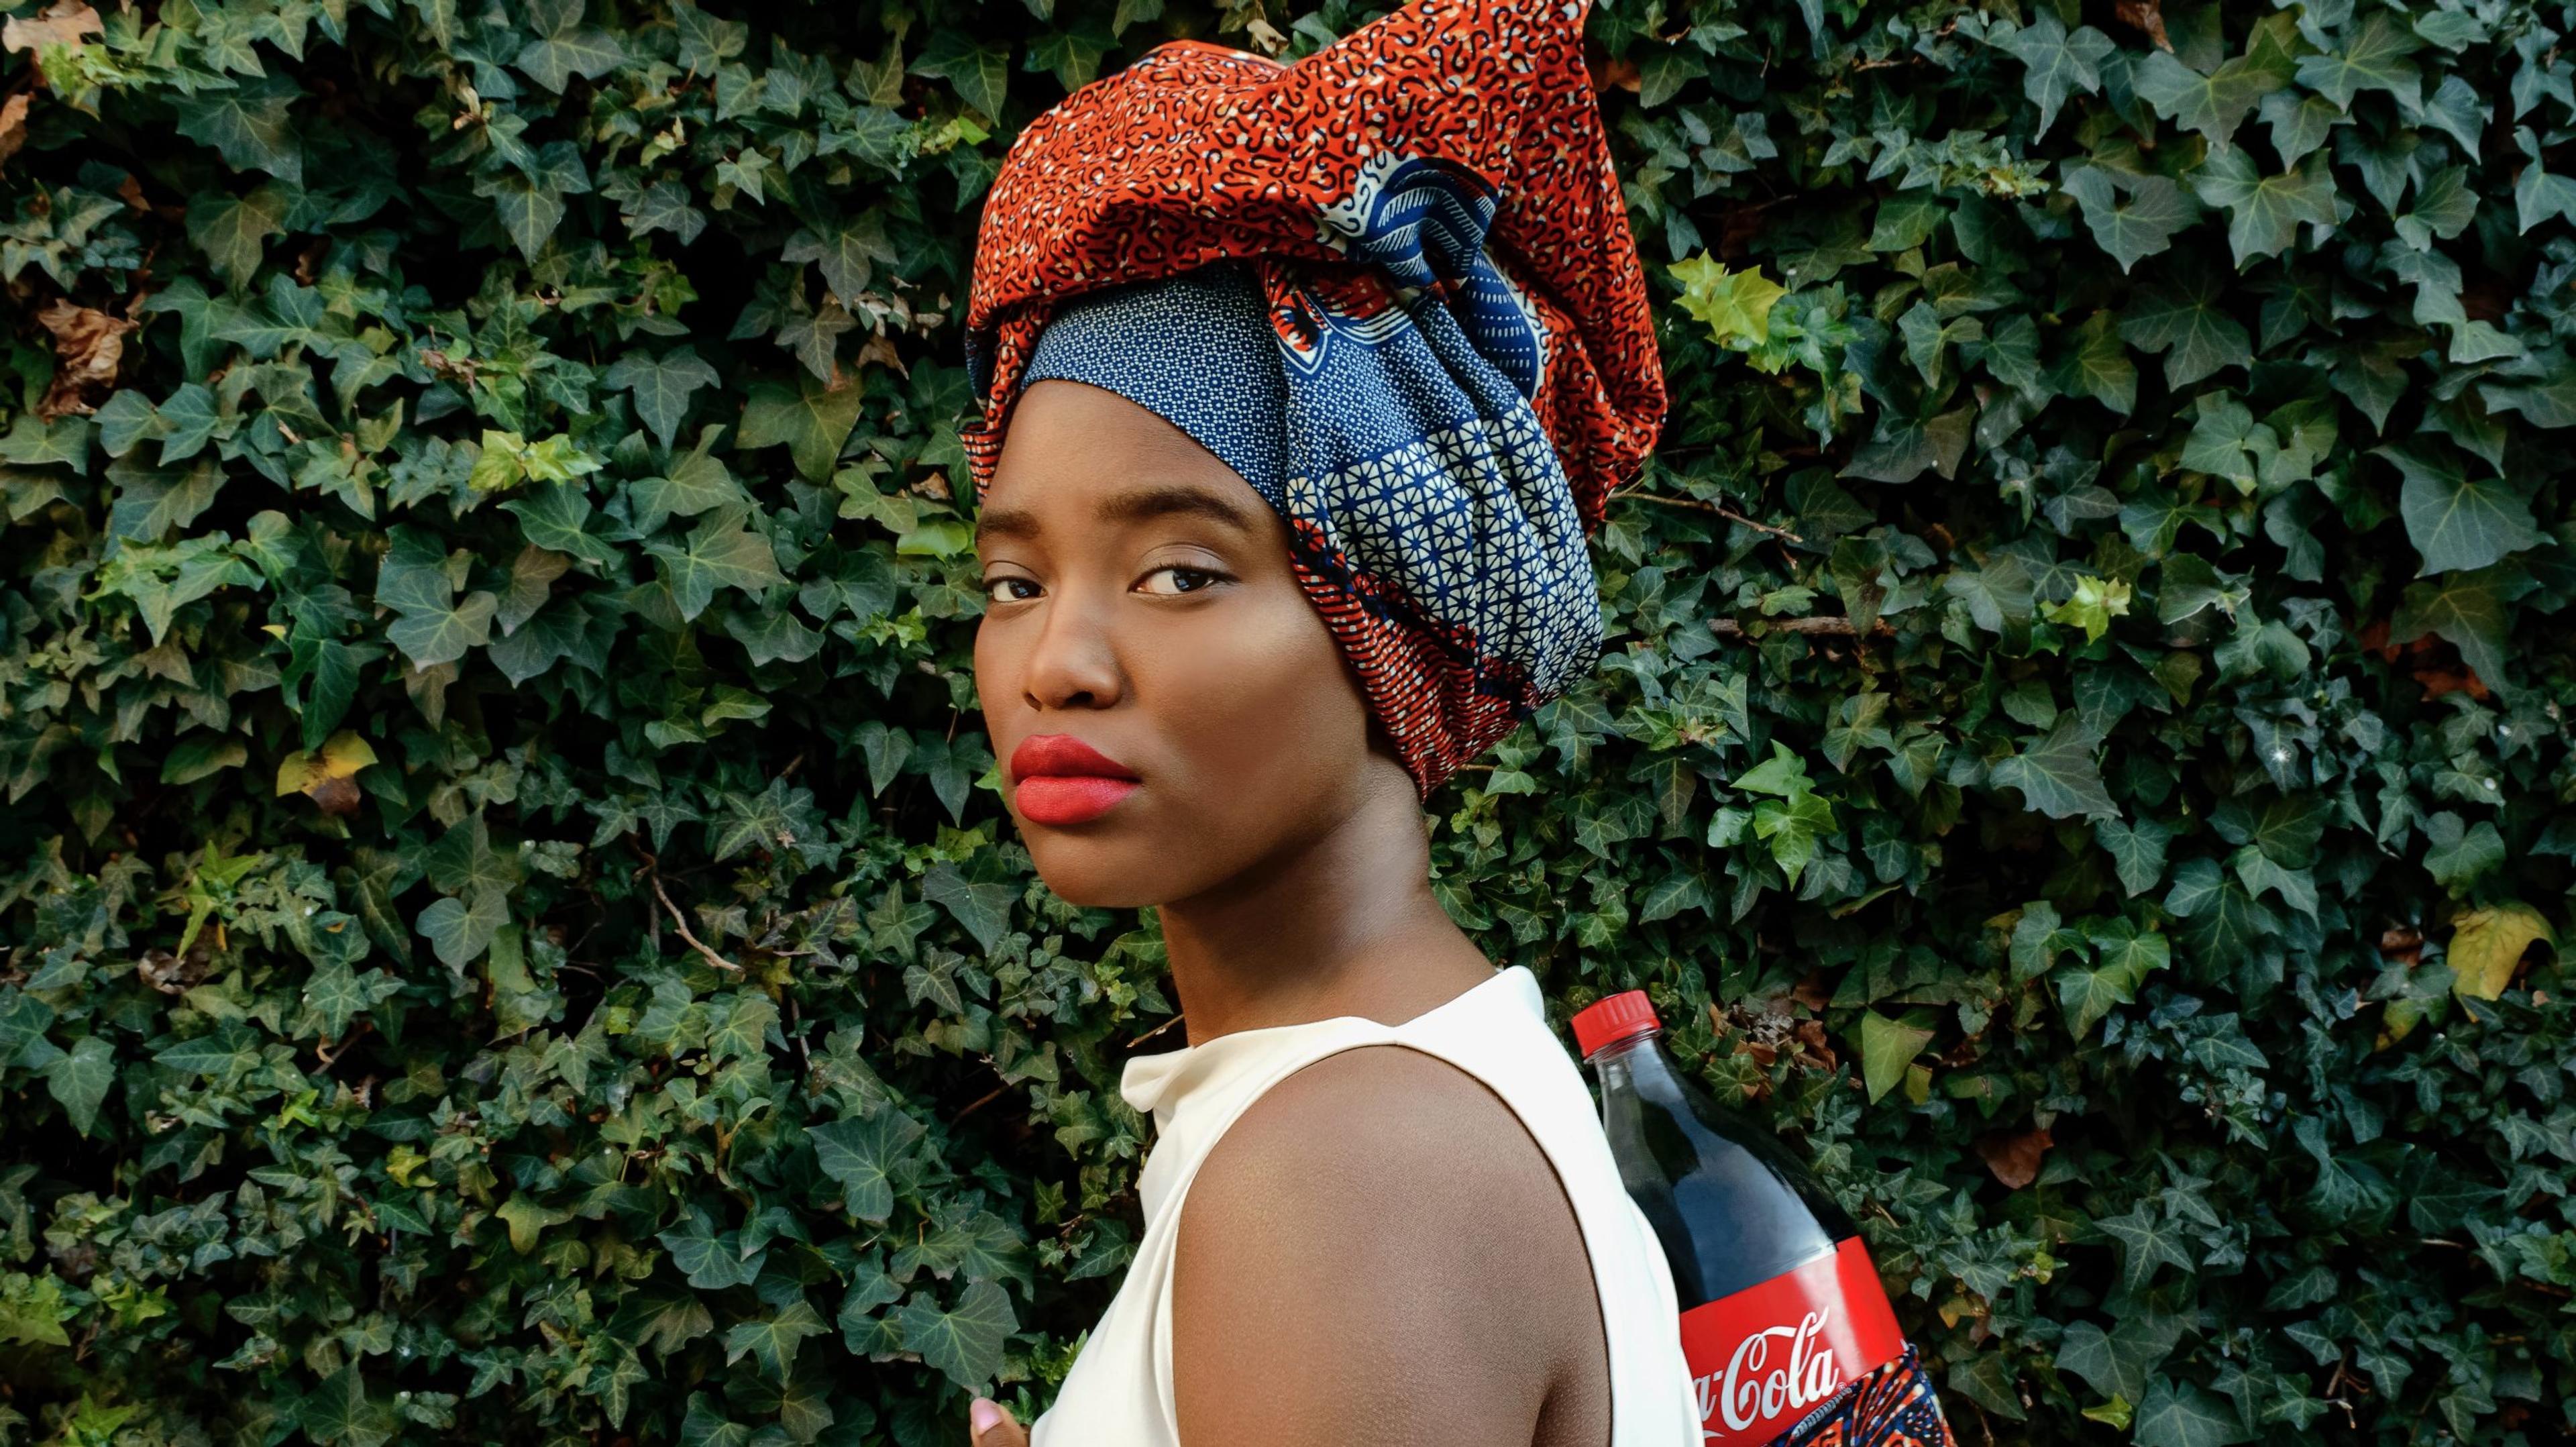 A portrait of a woman wearing red lipstick and a head covering carrying a Coca-Cola bottle on her back, with foliage in the background